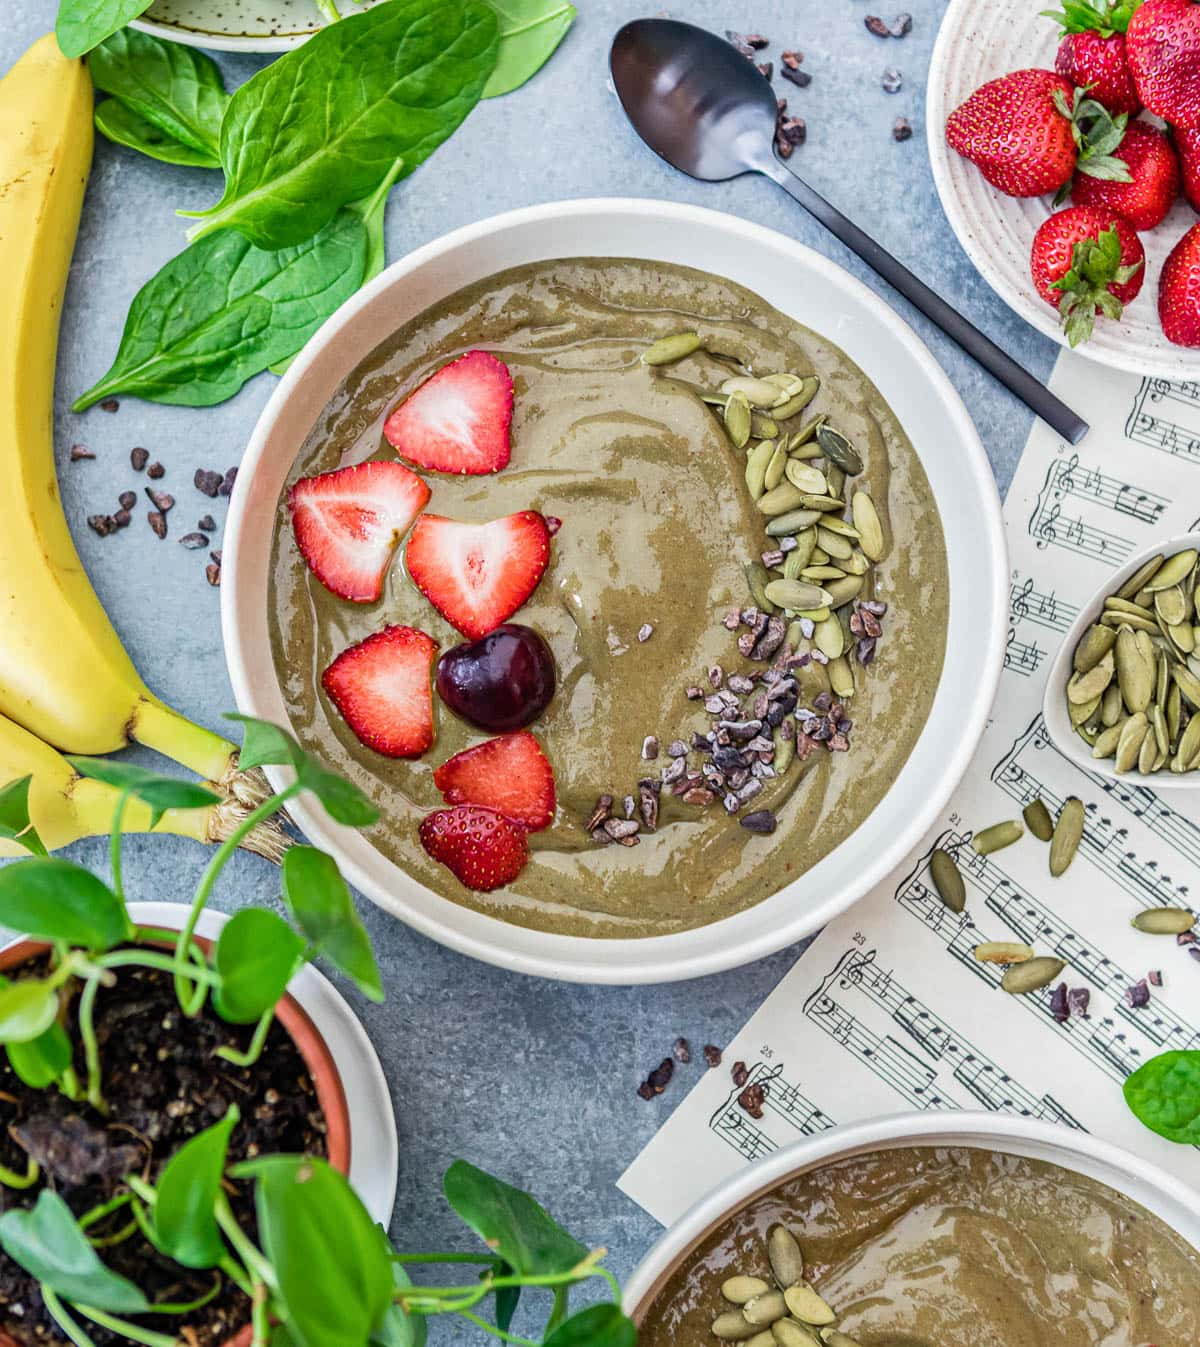 iron-rich smoothie bowl topped with pepitas, cacao nibs, strawberries and cherries.